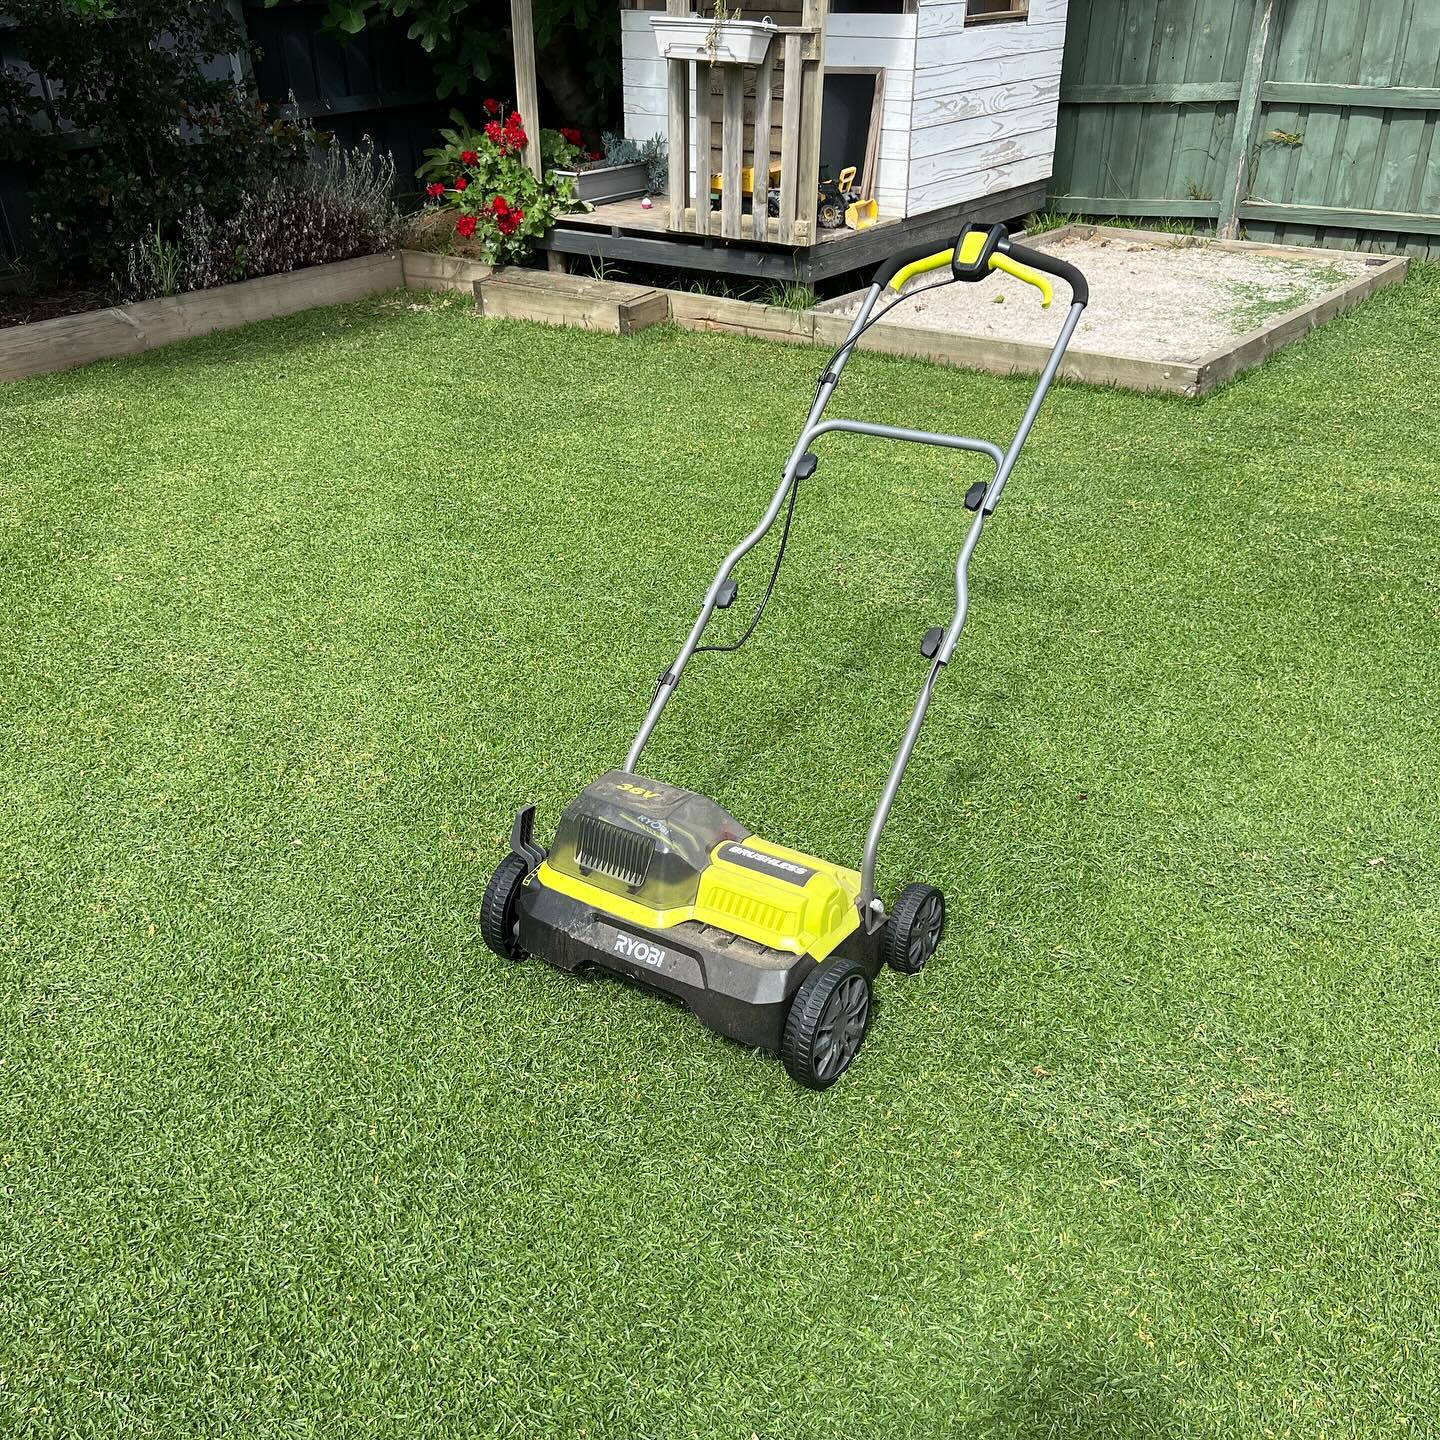 Haven’t had much time for the lawn this month. Few unexpected trips away.
Managed to get out yesterday for a mow, it was long!!

Gave it a tickle with the ryobiau scarifier to clean it up a bit.

Lowered the masport_ltd cylinder mower down 2.5mm also to reset it a little.
Hopefully that keeps me safe with another few days away expected this week.

For all the neglect and punishment, it’s still not looking too bad!

#backlawn #backyard #kikuyulawn #kikuyugrass #lawnrenovation #lawnleveling #lawnmower #manualmower #lawnmowing #lawncare #lawn #grass #enjoythemow #lawnobsession #lawnedging #mowjob #lawnporn #masportcleveland #masportmowers #masportmowersau #masportolympic #lawnporn #cylindermower #reelmower #reelmower #ryobimade